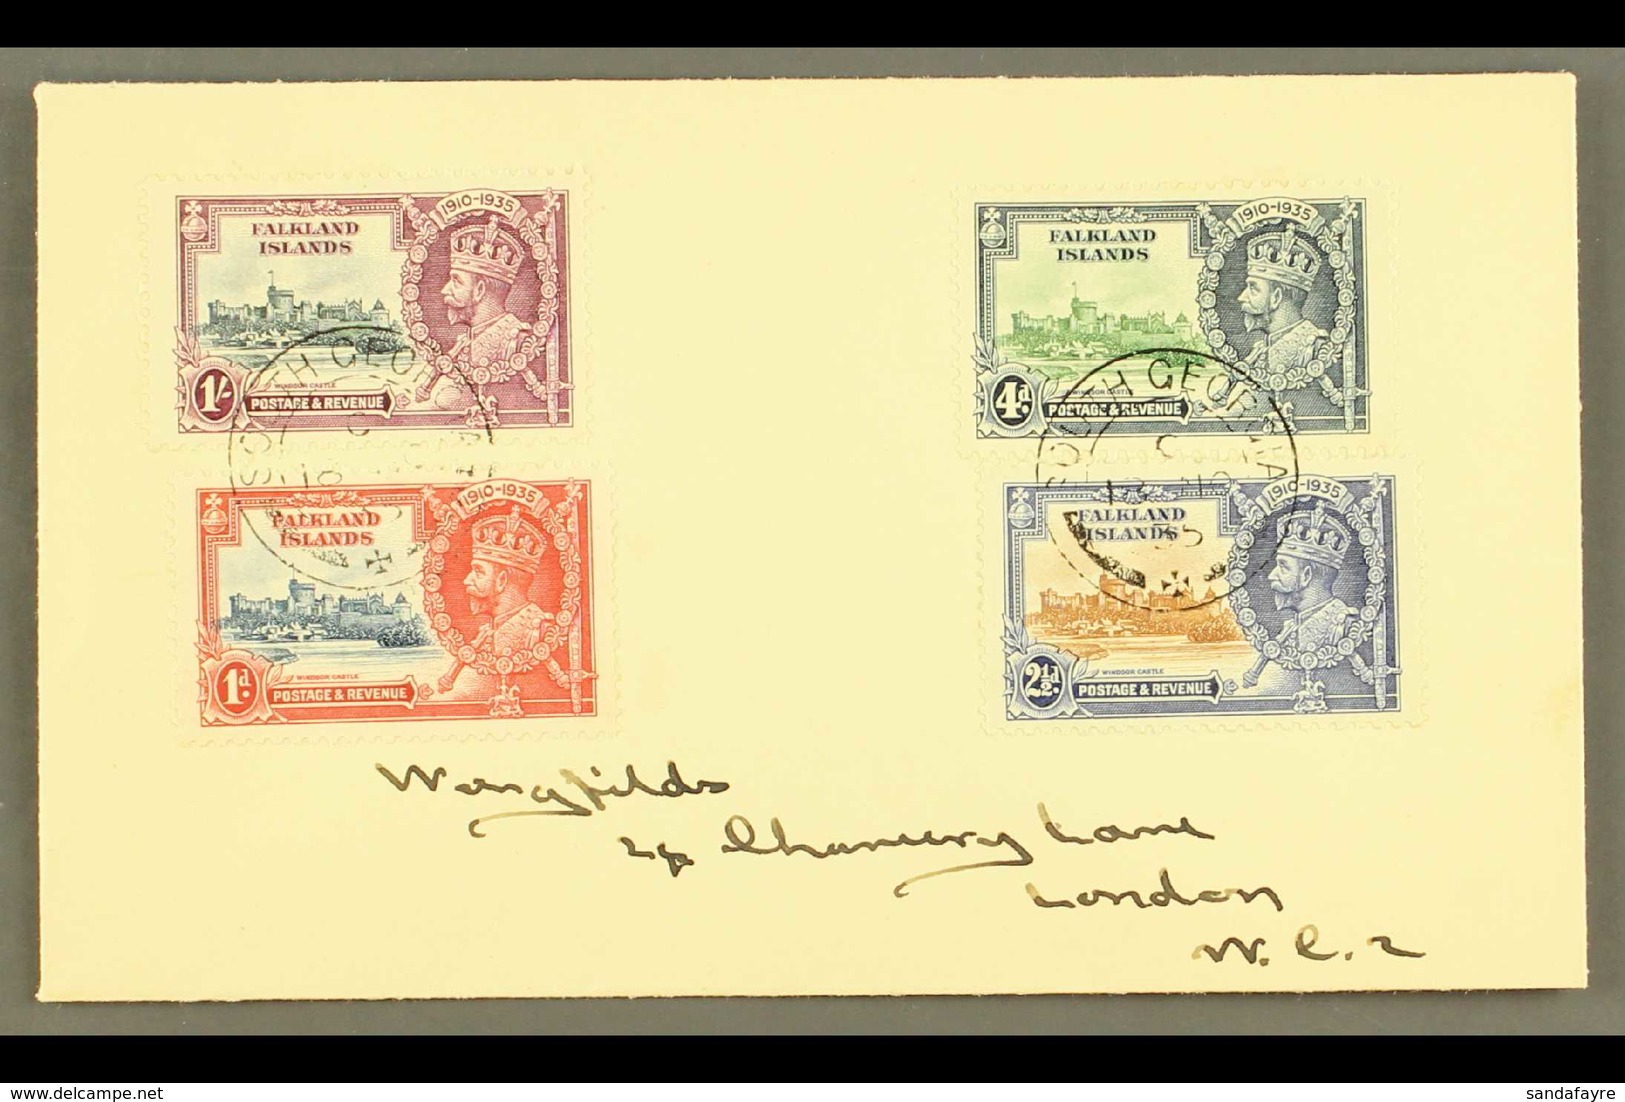 SOUTH GEORGIA 1935 Silver Jubilee Complete Set, SG 139/142, Fine Used On Cover Tied By South Georgia Cds Cancels Of 8 NO - Falkland Islands